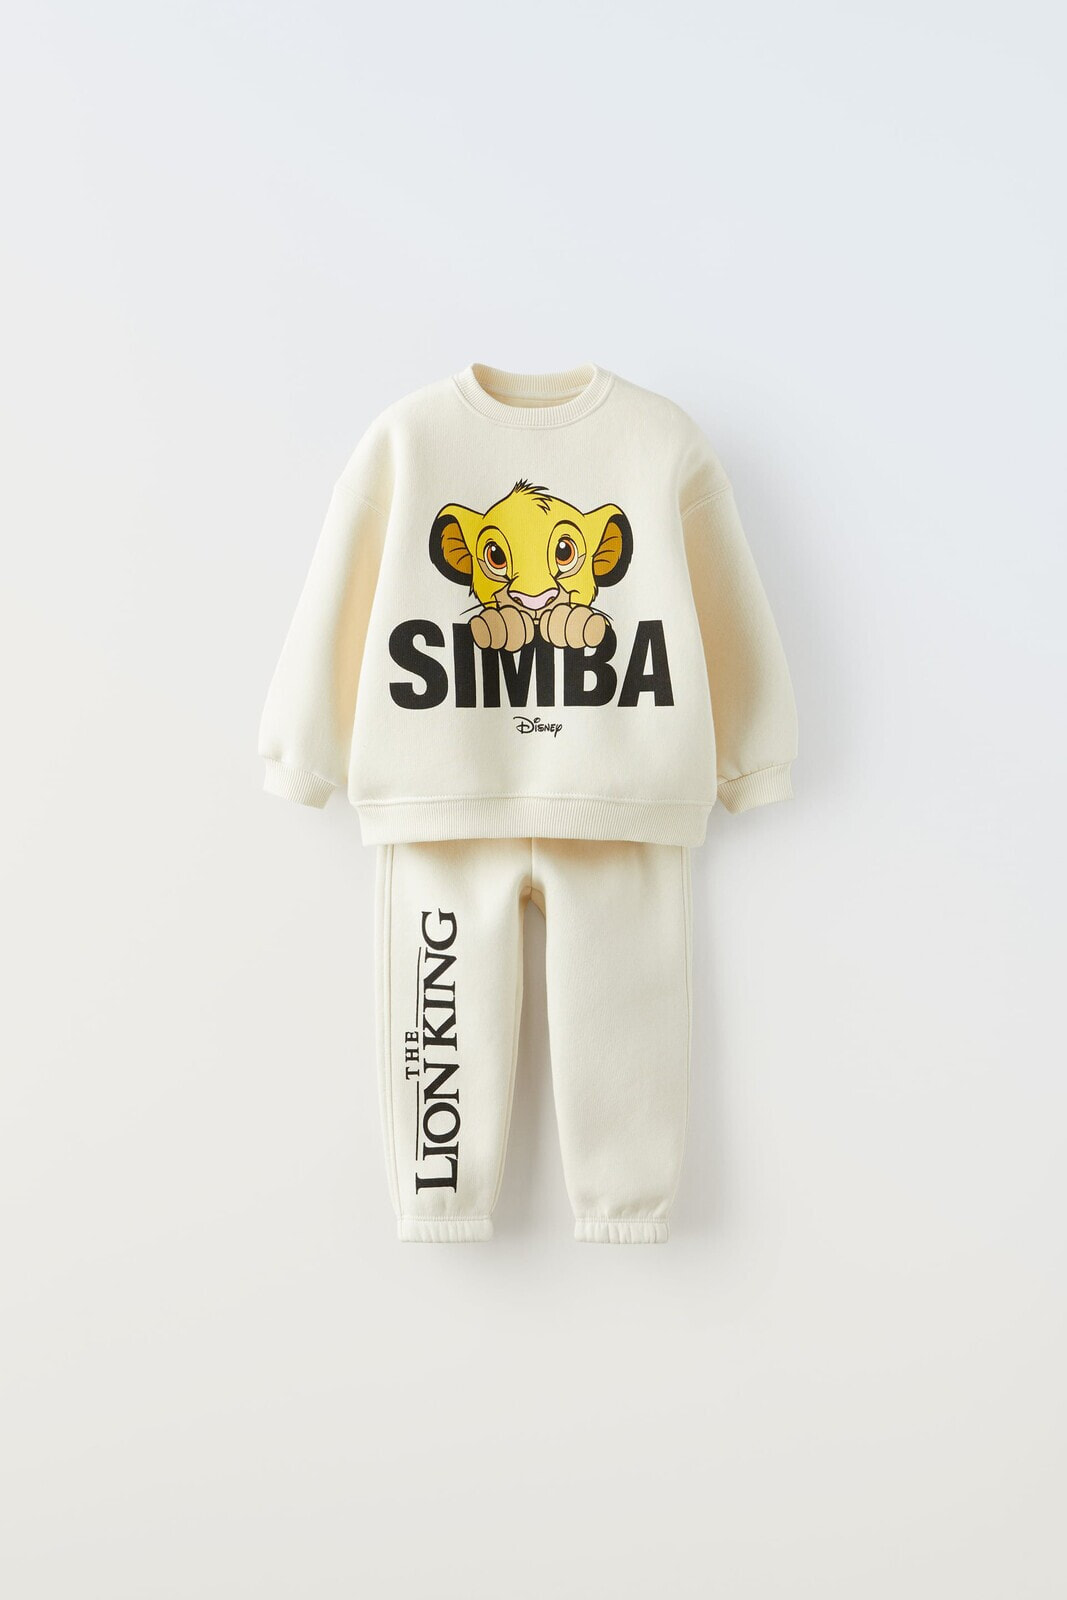 The lion king © disney plush sweatshirt and trousers co ord